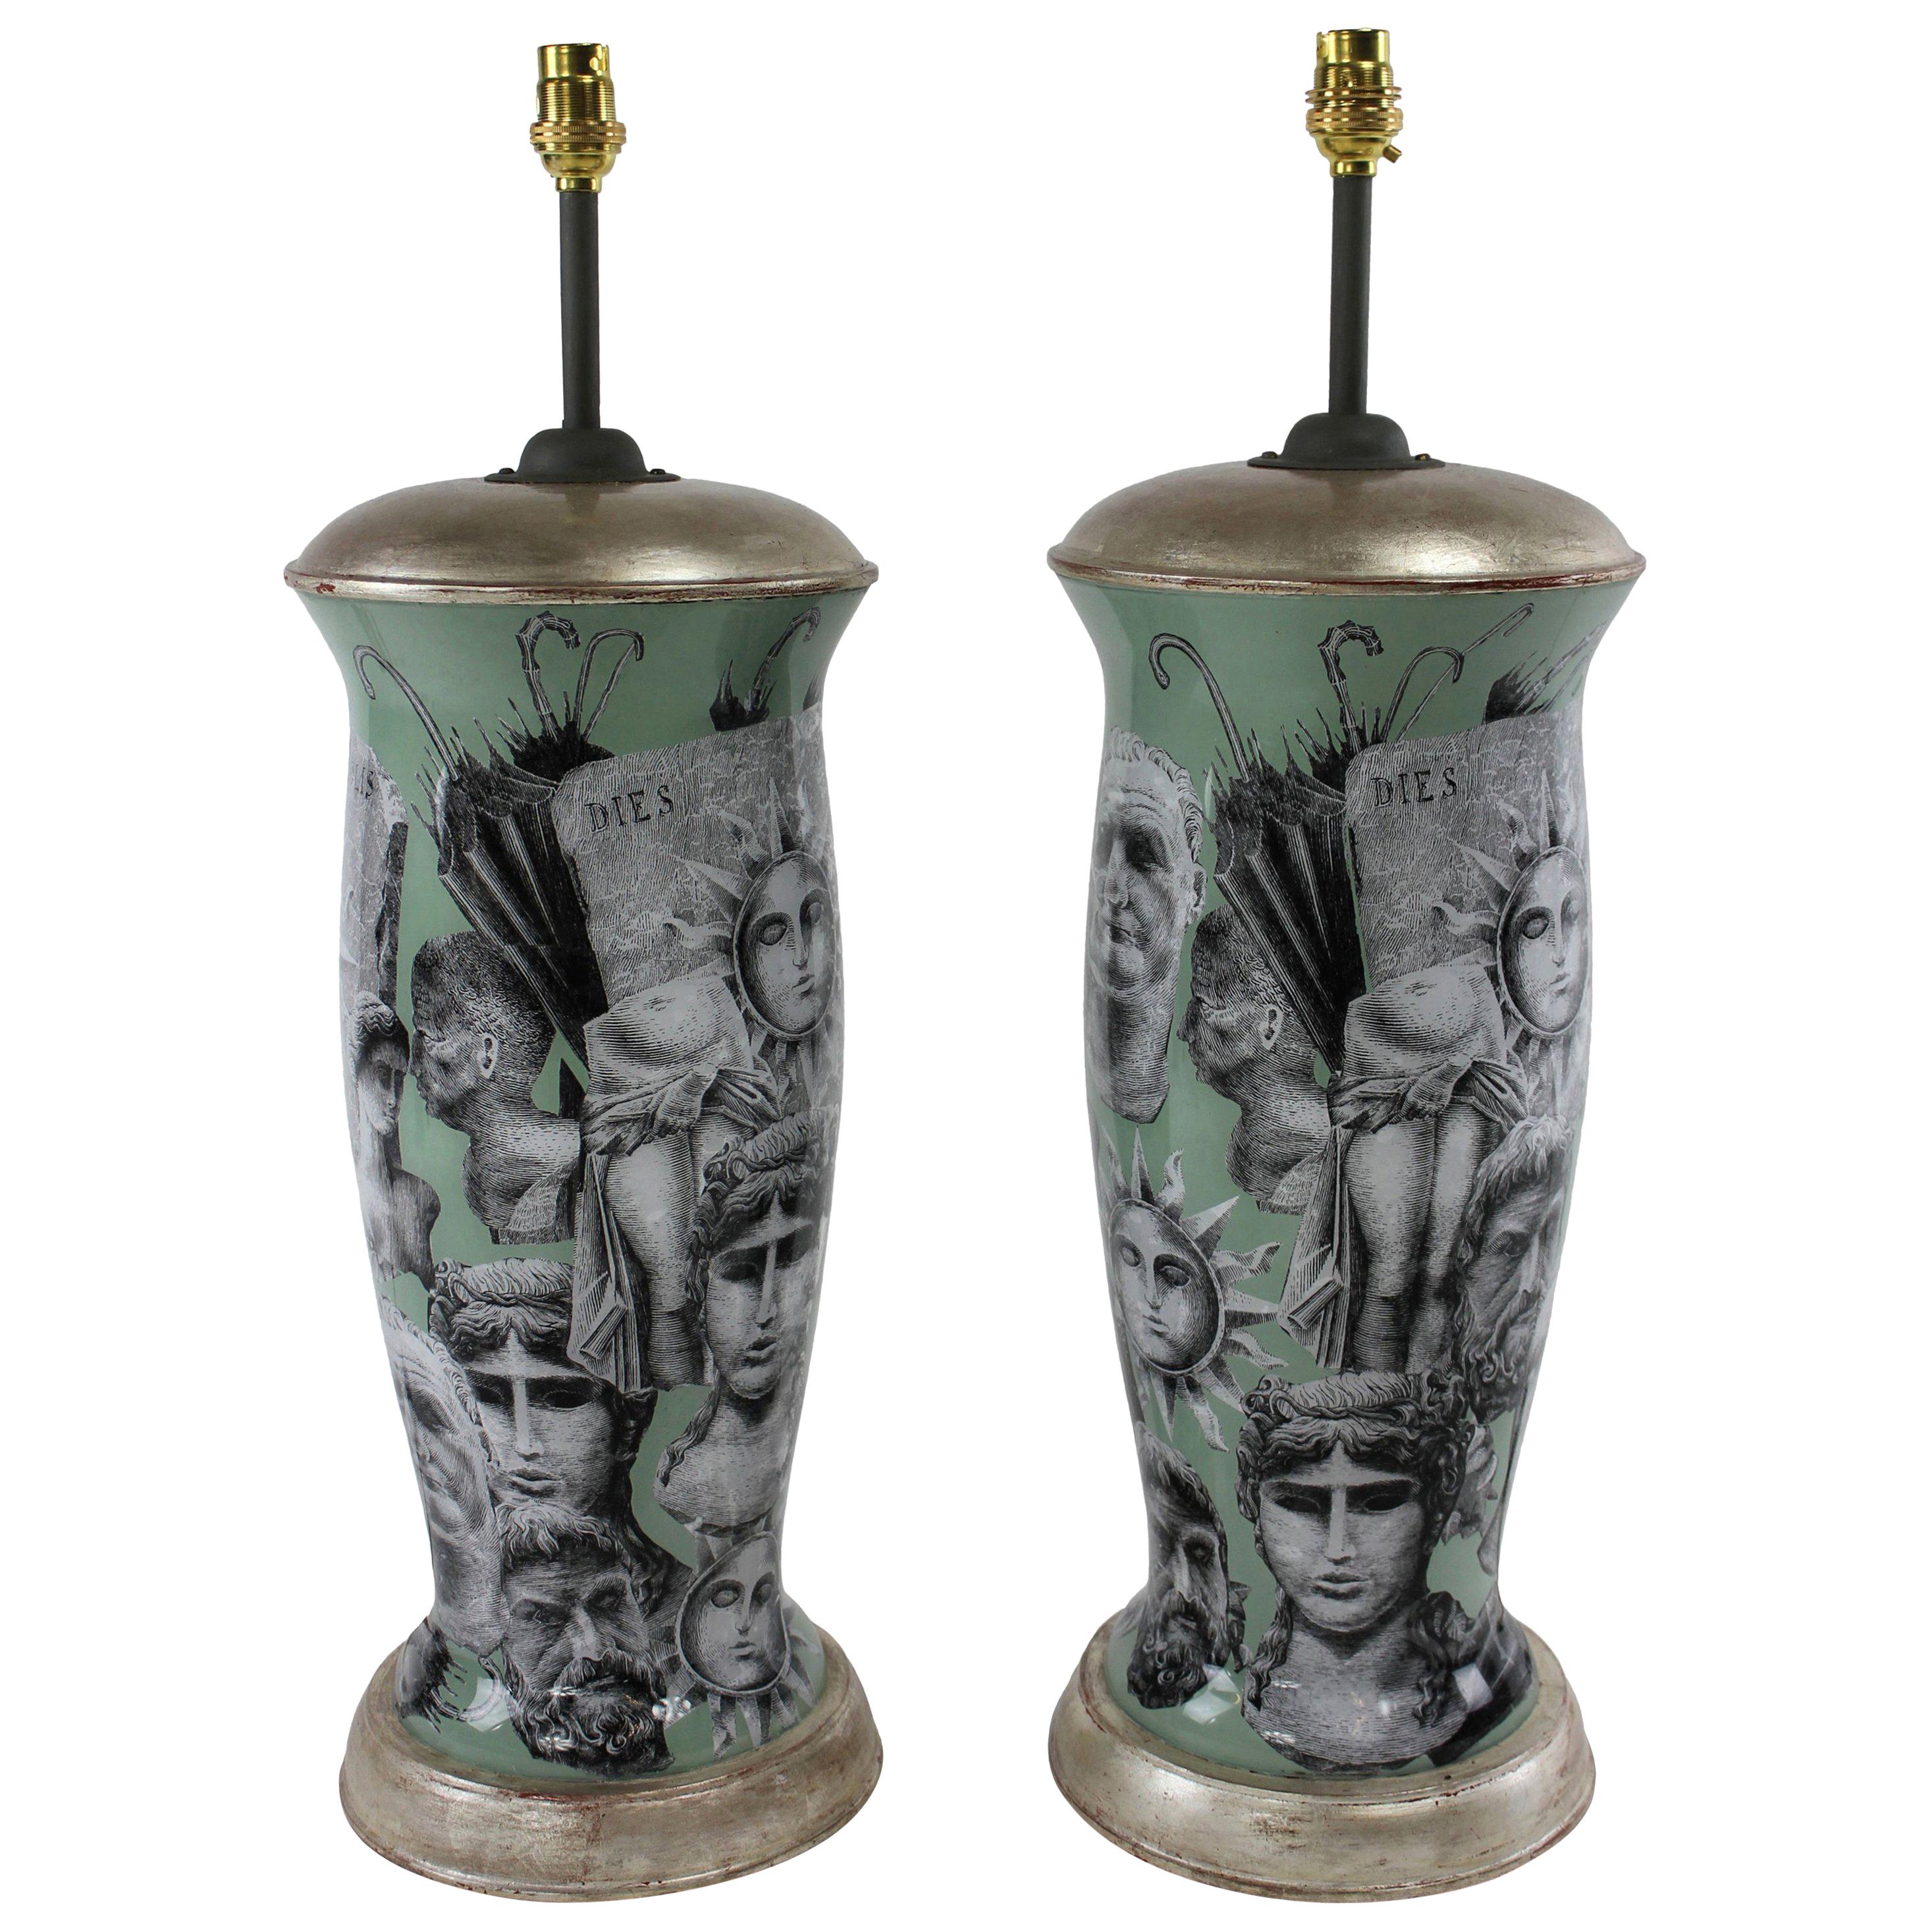 A pair of declamania hand painted table lamps inspired by the designs of Pietro Fornasetti. With white gold leaf tops and bases.